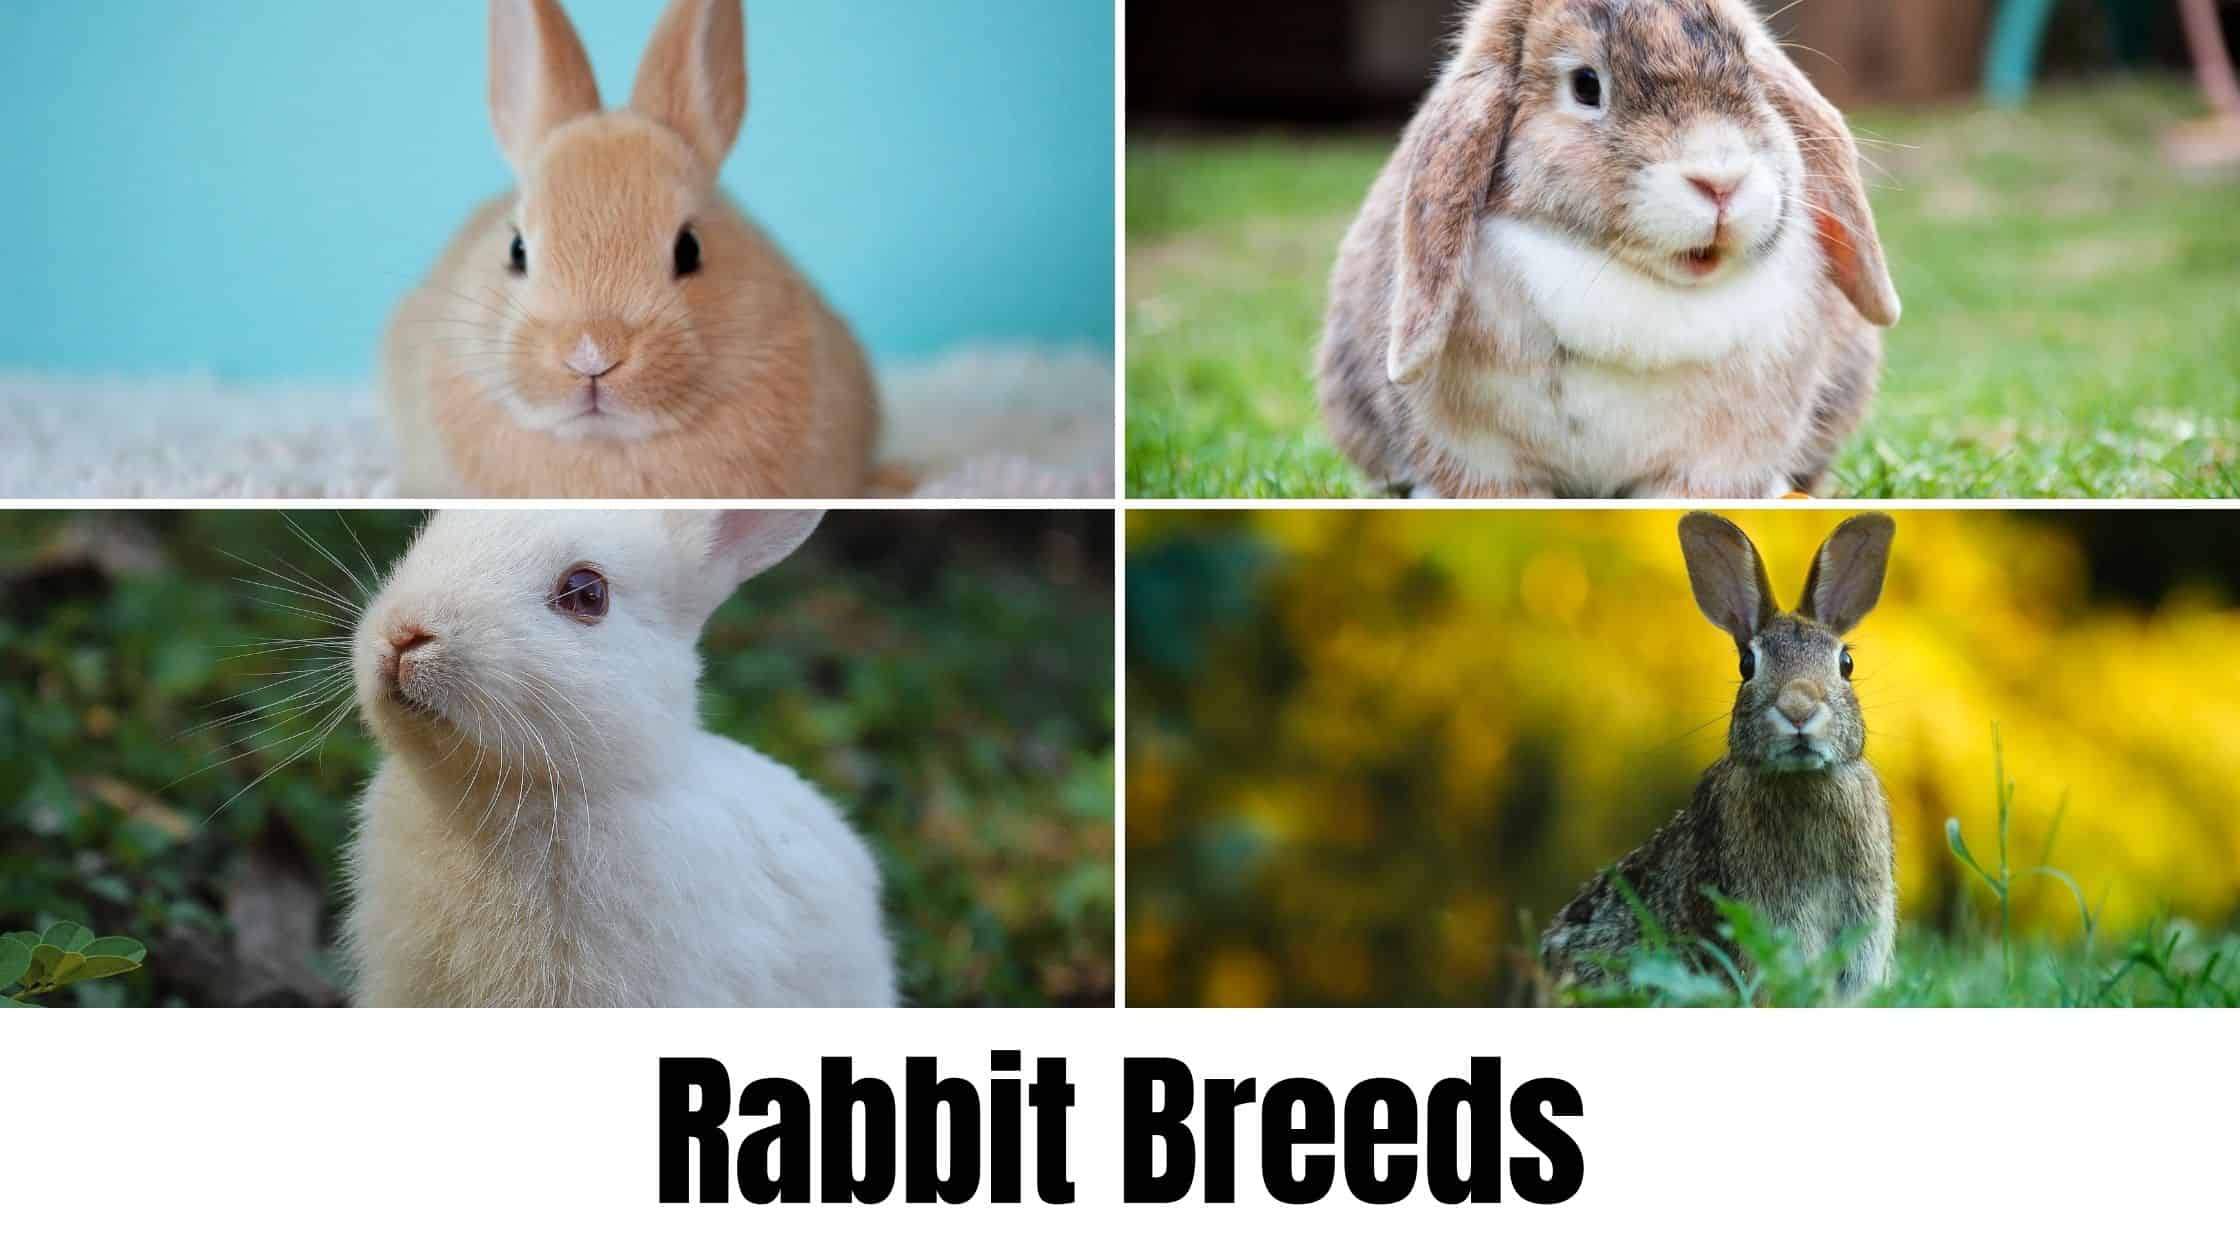 Rabbit Breeds - The 51 Breeds Recognised by ARBA - With Pictures!